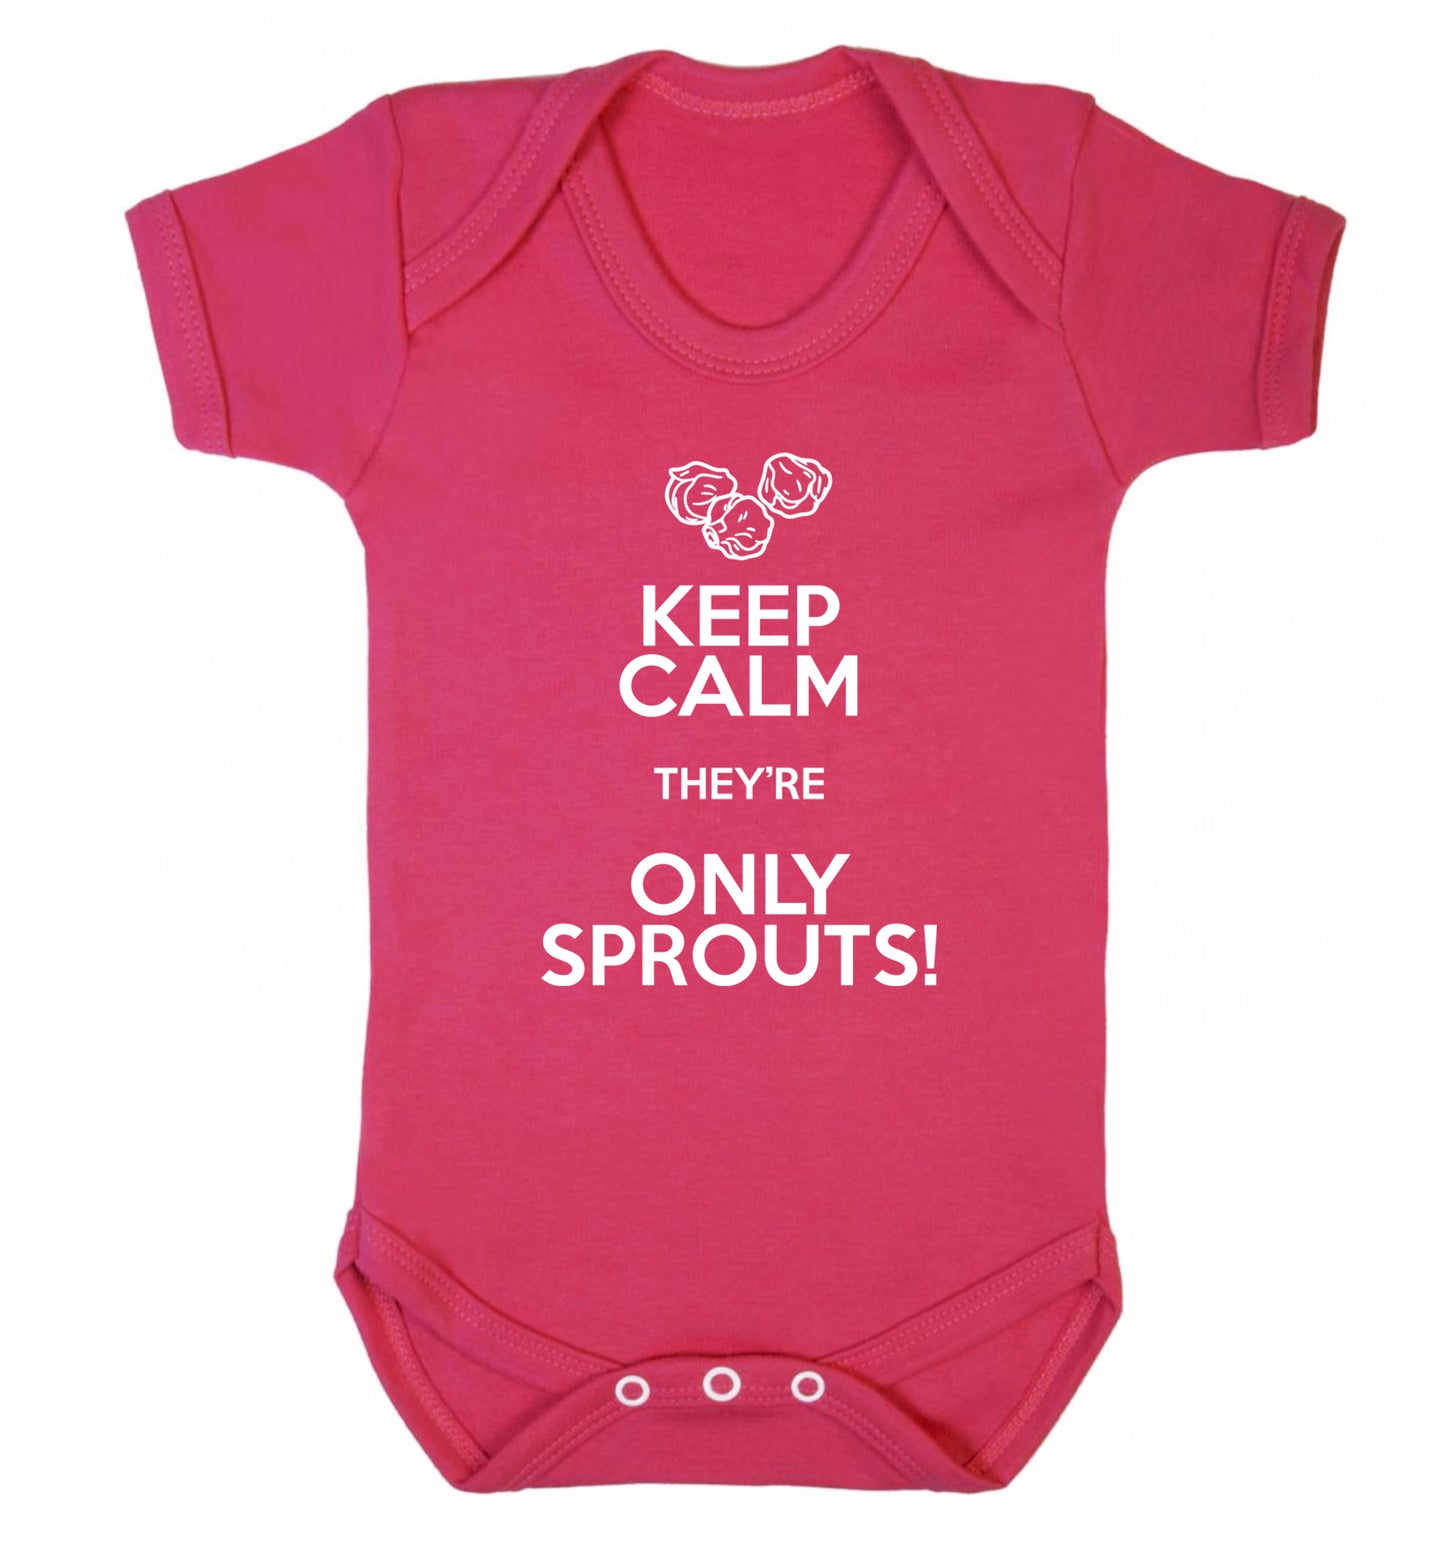 Keep calm they're only sprouts Baby Vest dark pink 18-24 months